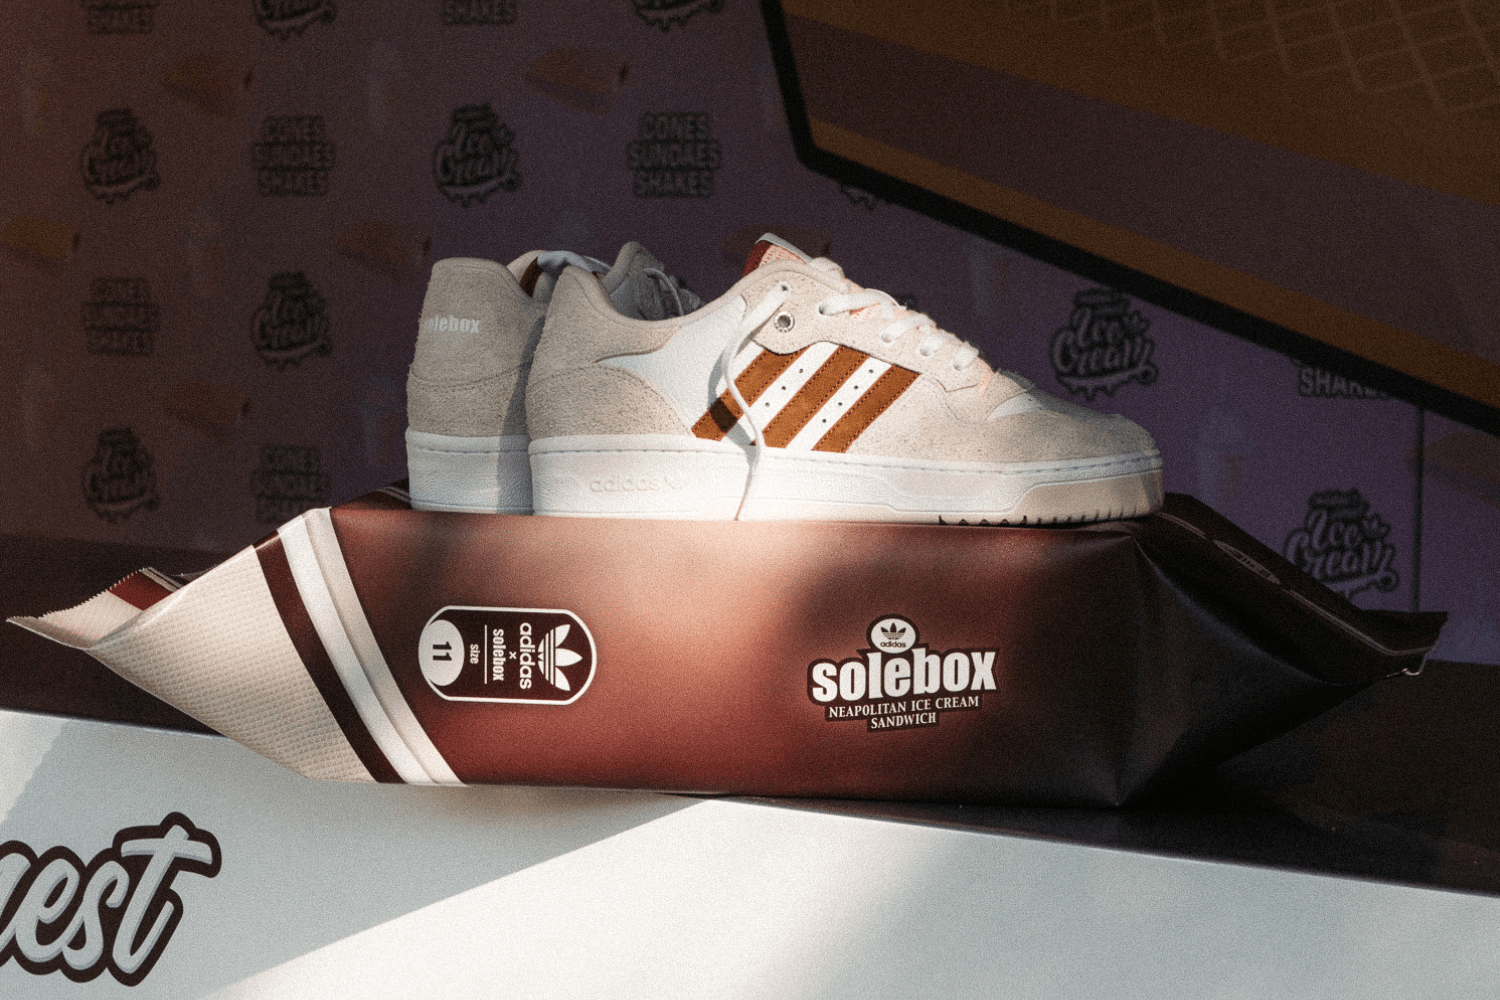 solebox and adidas transform the Rivalry Low into Neapolitan ice cream waffle